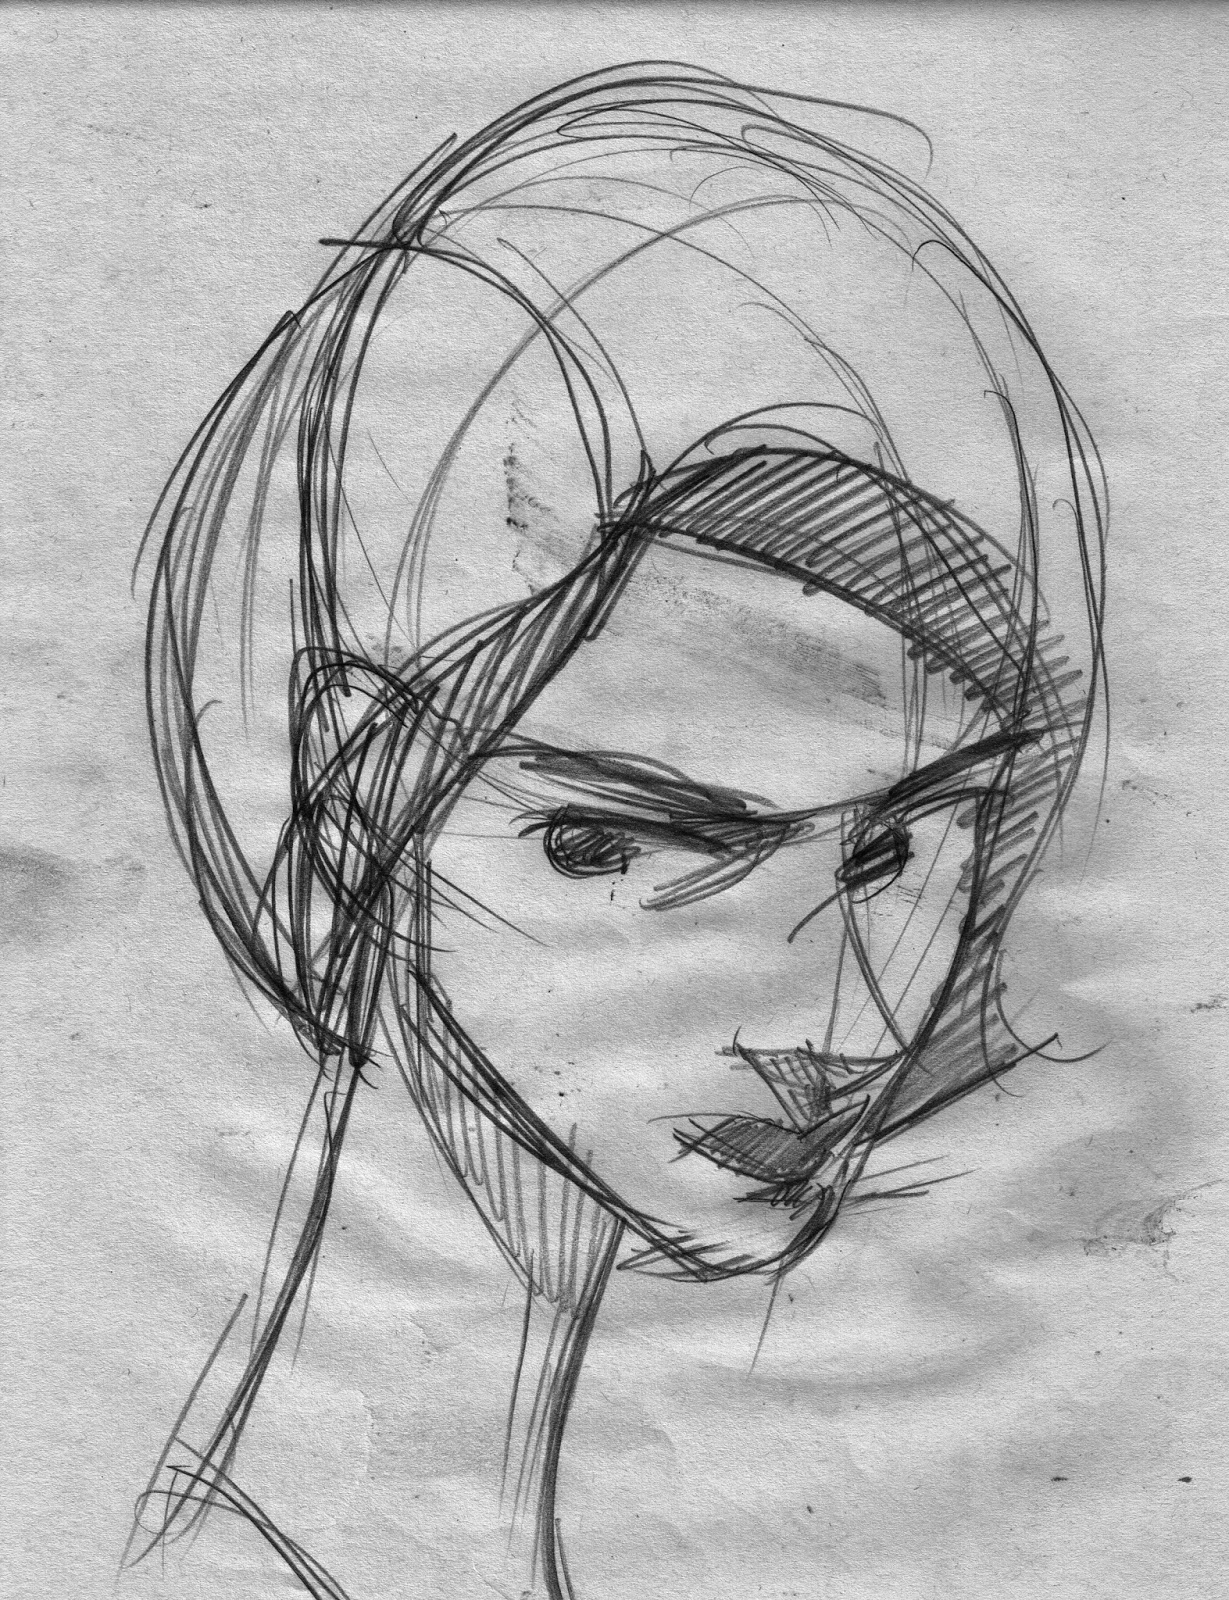 Brett Helquist: SKETCHBOOK: HOW TO DRAW THE HEAD